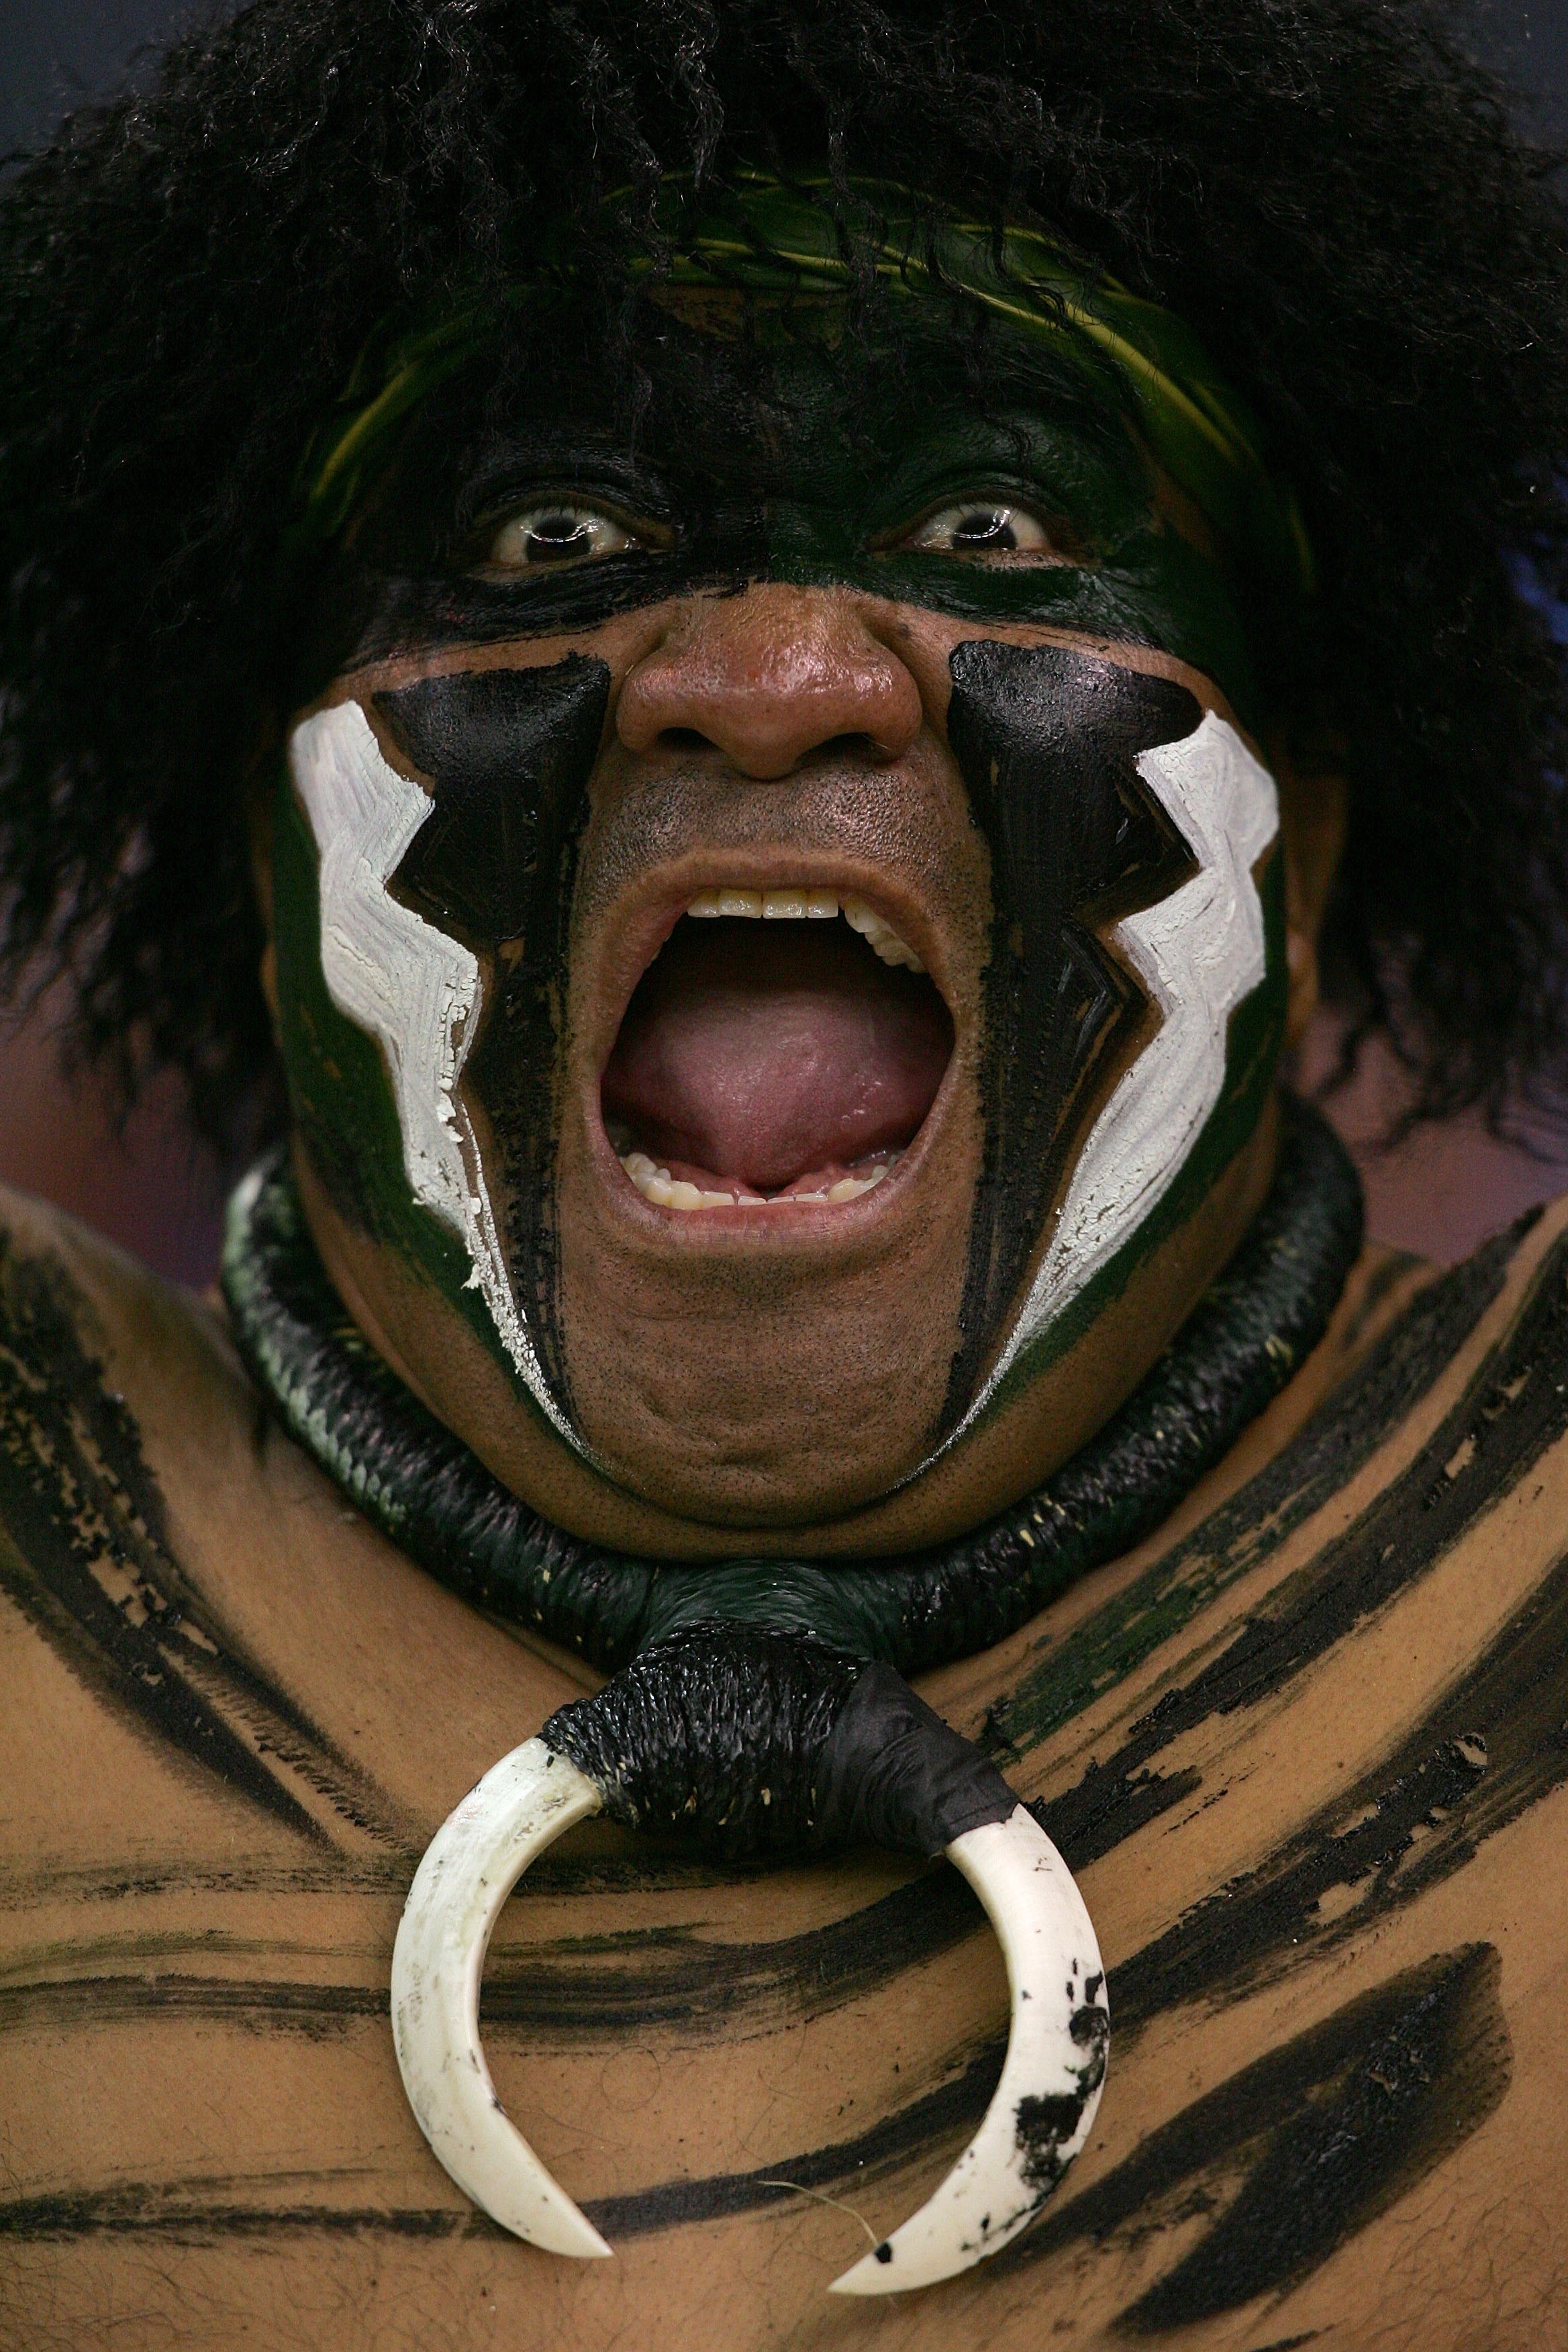 NEW ORLEANS - JANUARY 01:  The mascot of the Hawai'i Warriors performs against the Georgia Bulldogs during the Allstate Sugar Bowl at the Louisiana Superdome on January 1, 2008 in New Orleans, Louisiana. Georgia won 41-10.  (Photo by Matthew Stockman/Gett